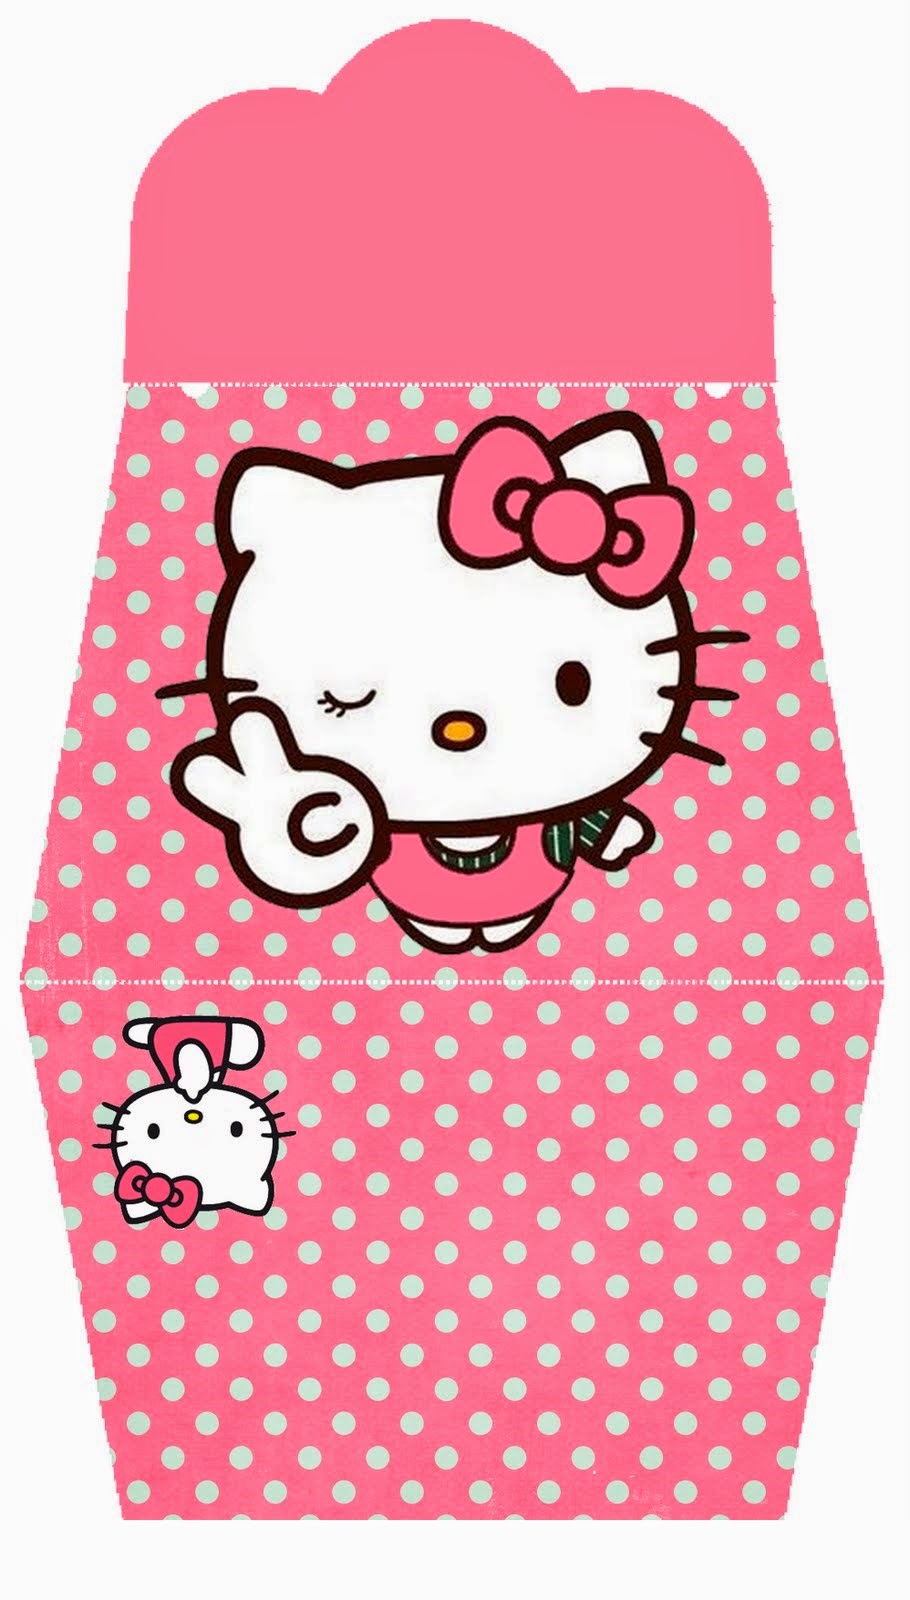 Hello Kitty in Pink Free Printable Purse Invitations.